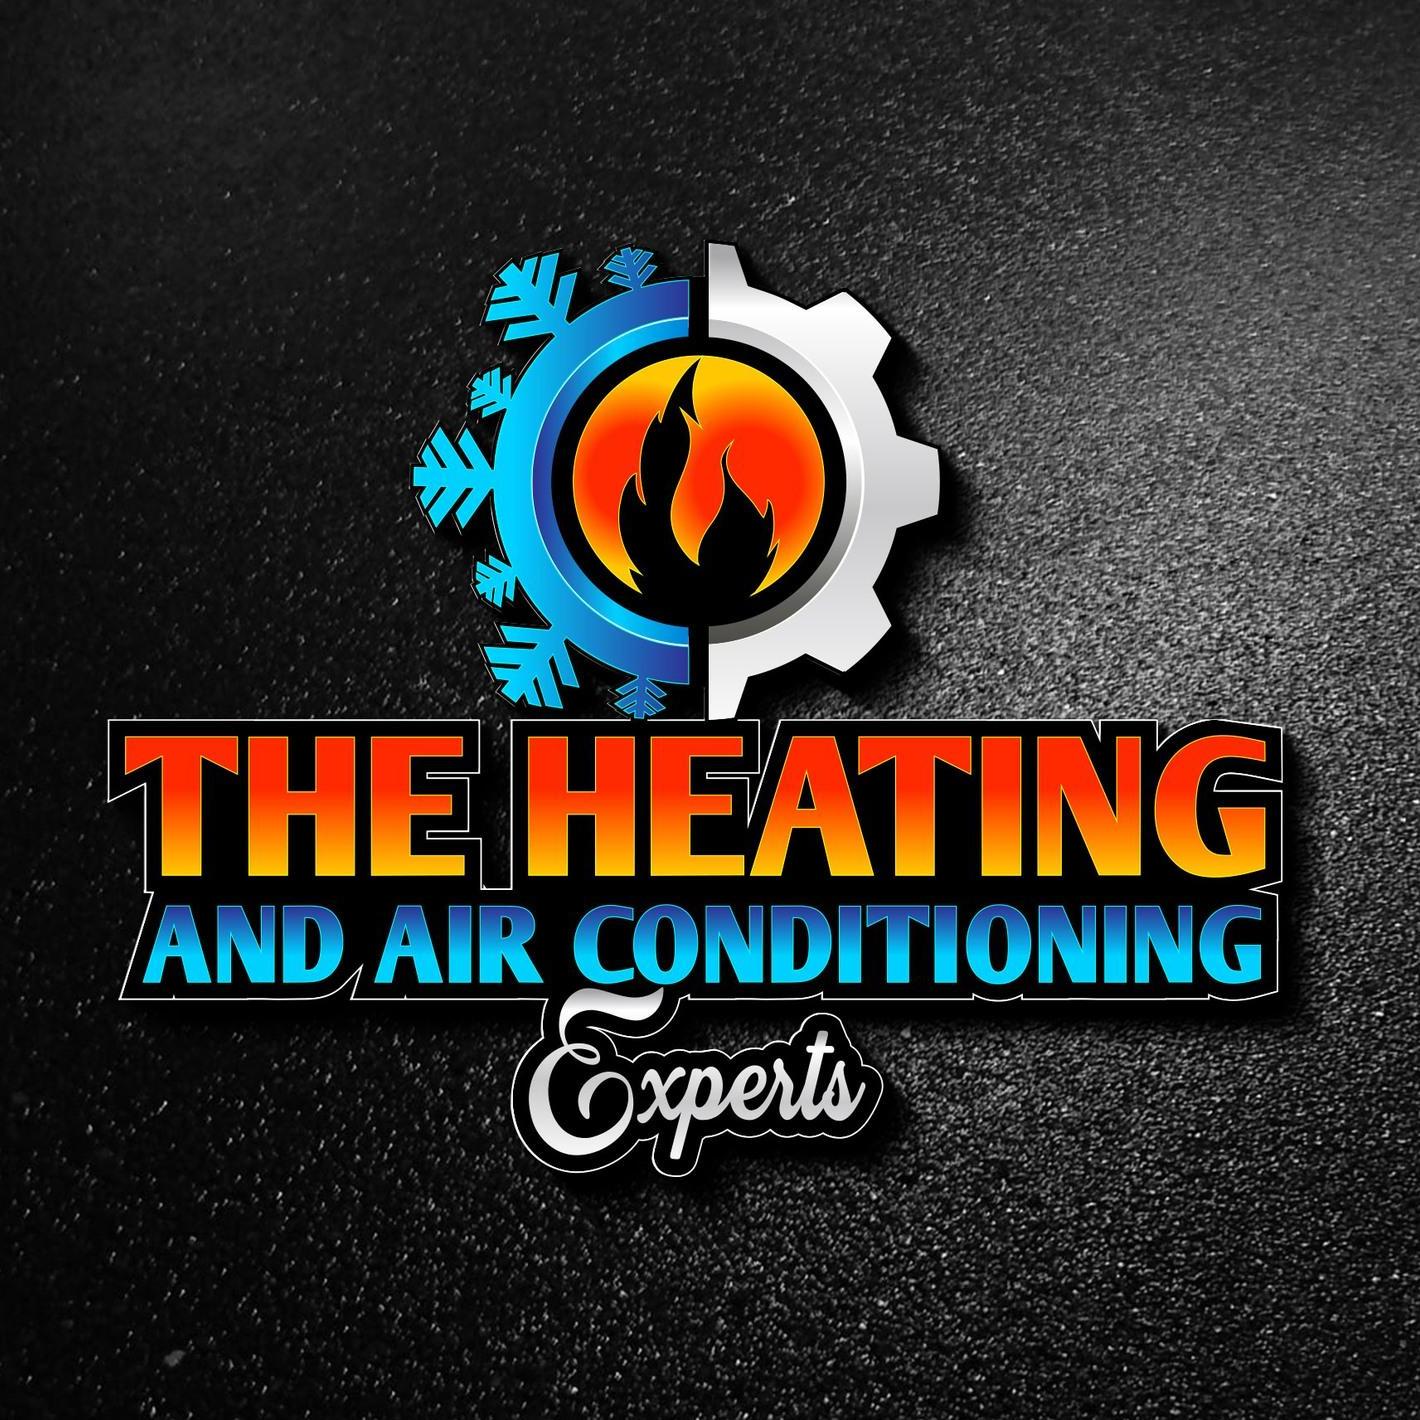 The Heating and Air Conditioning Experts